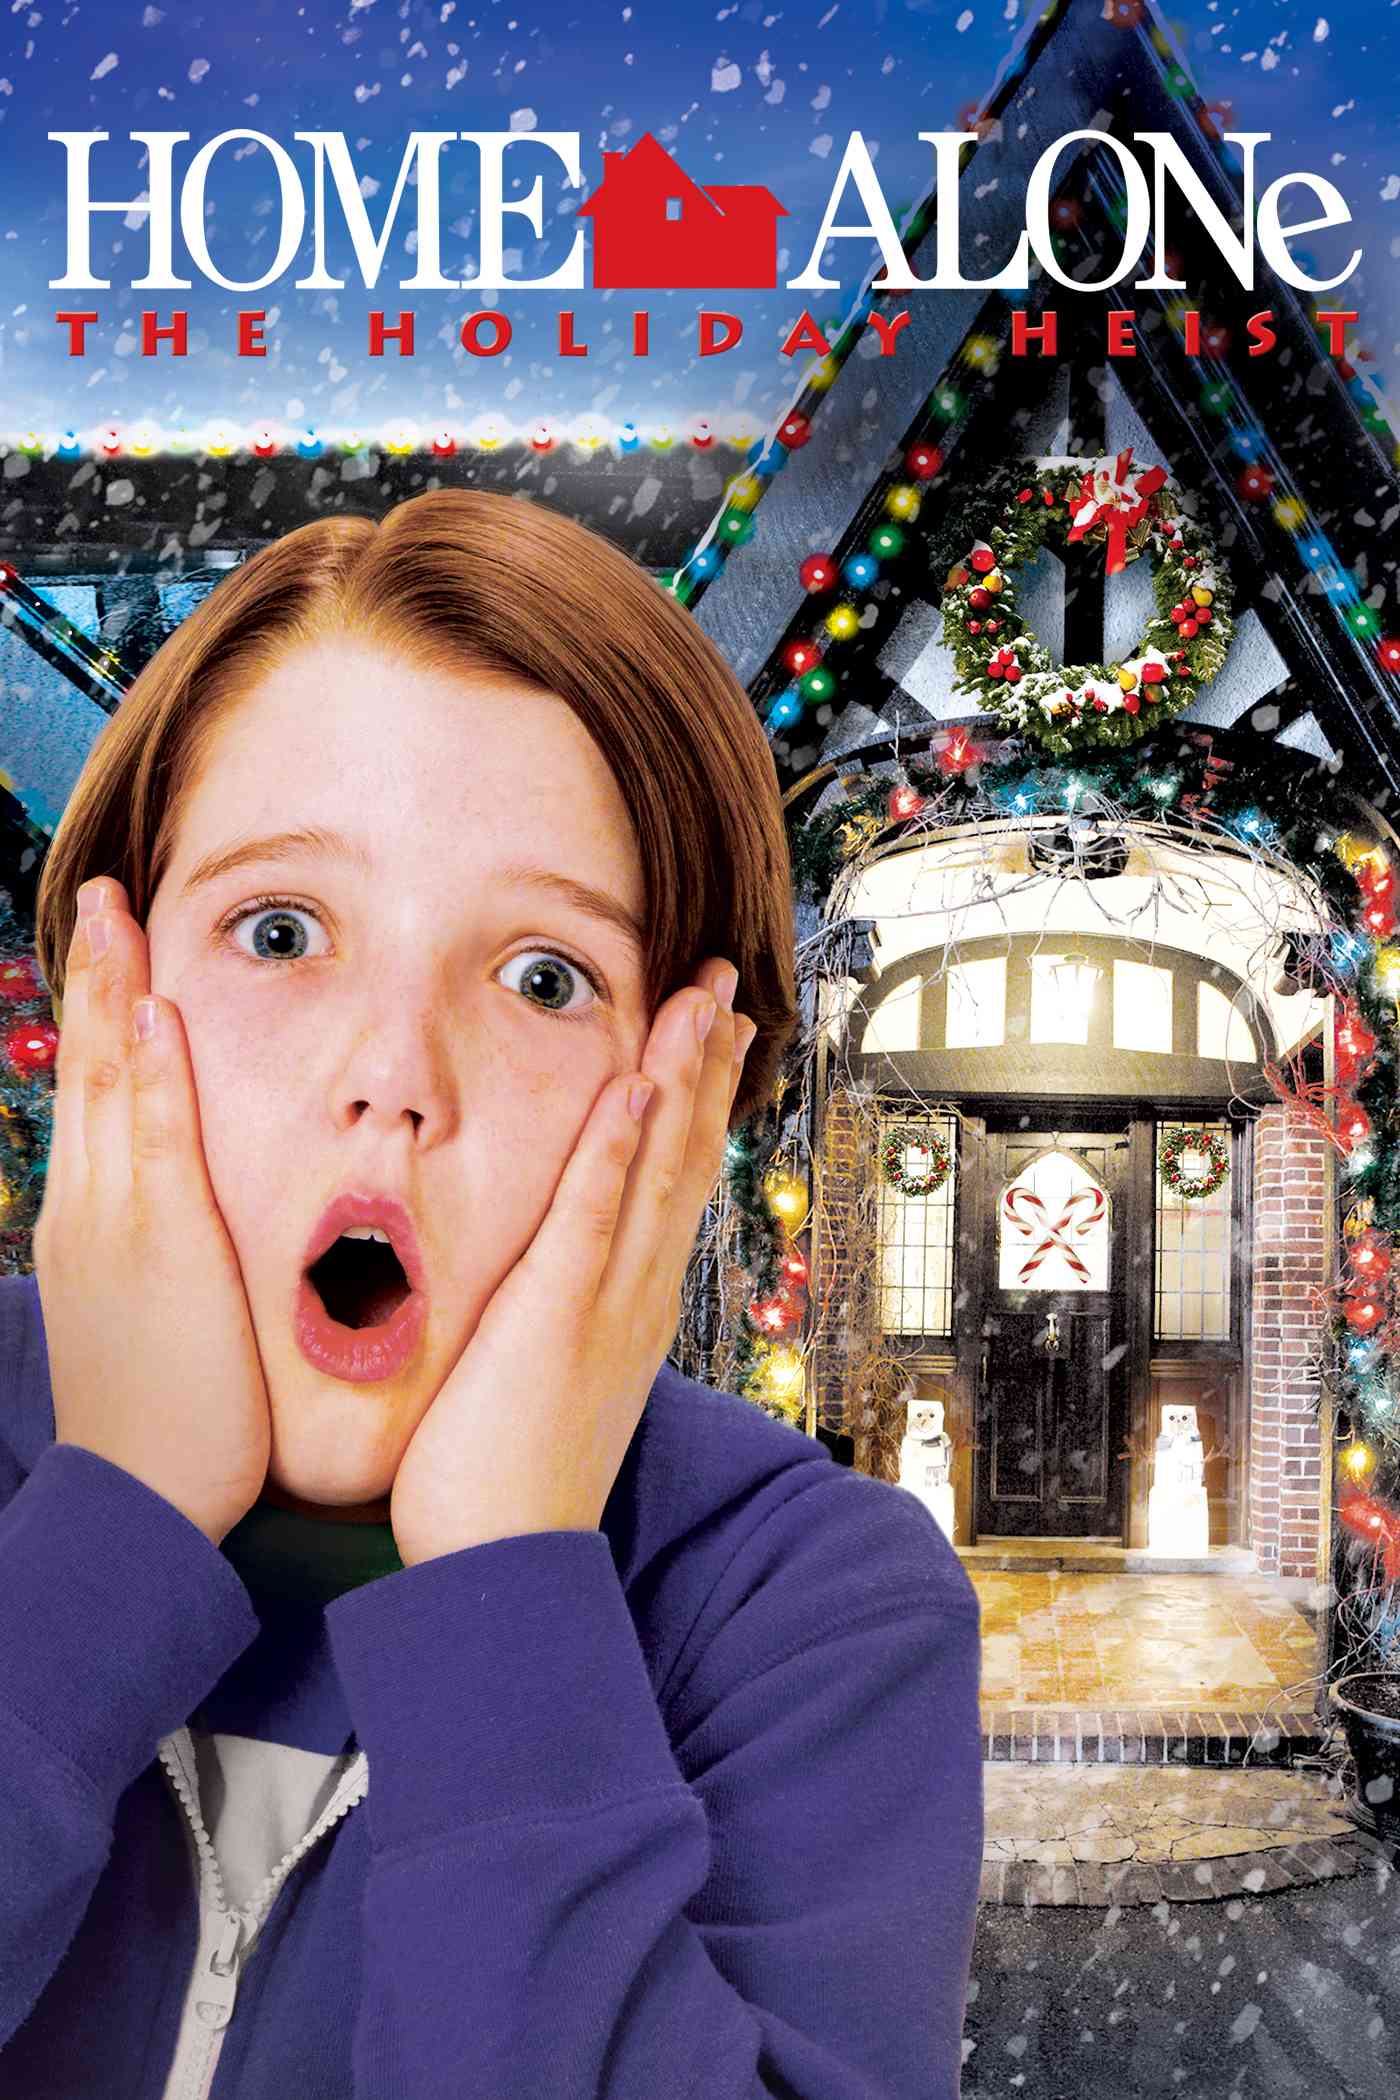 FULL MOVIE: Home Alone: The Holiday Heist (2011)